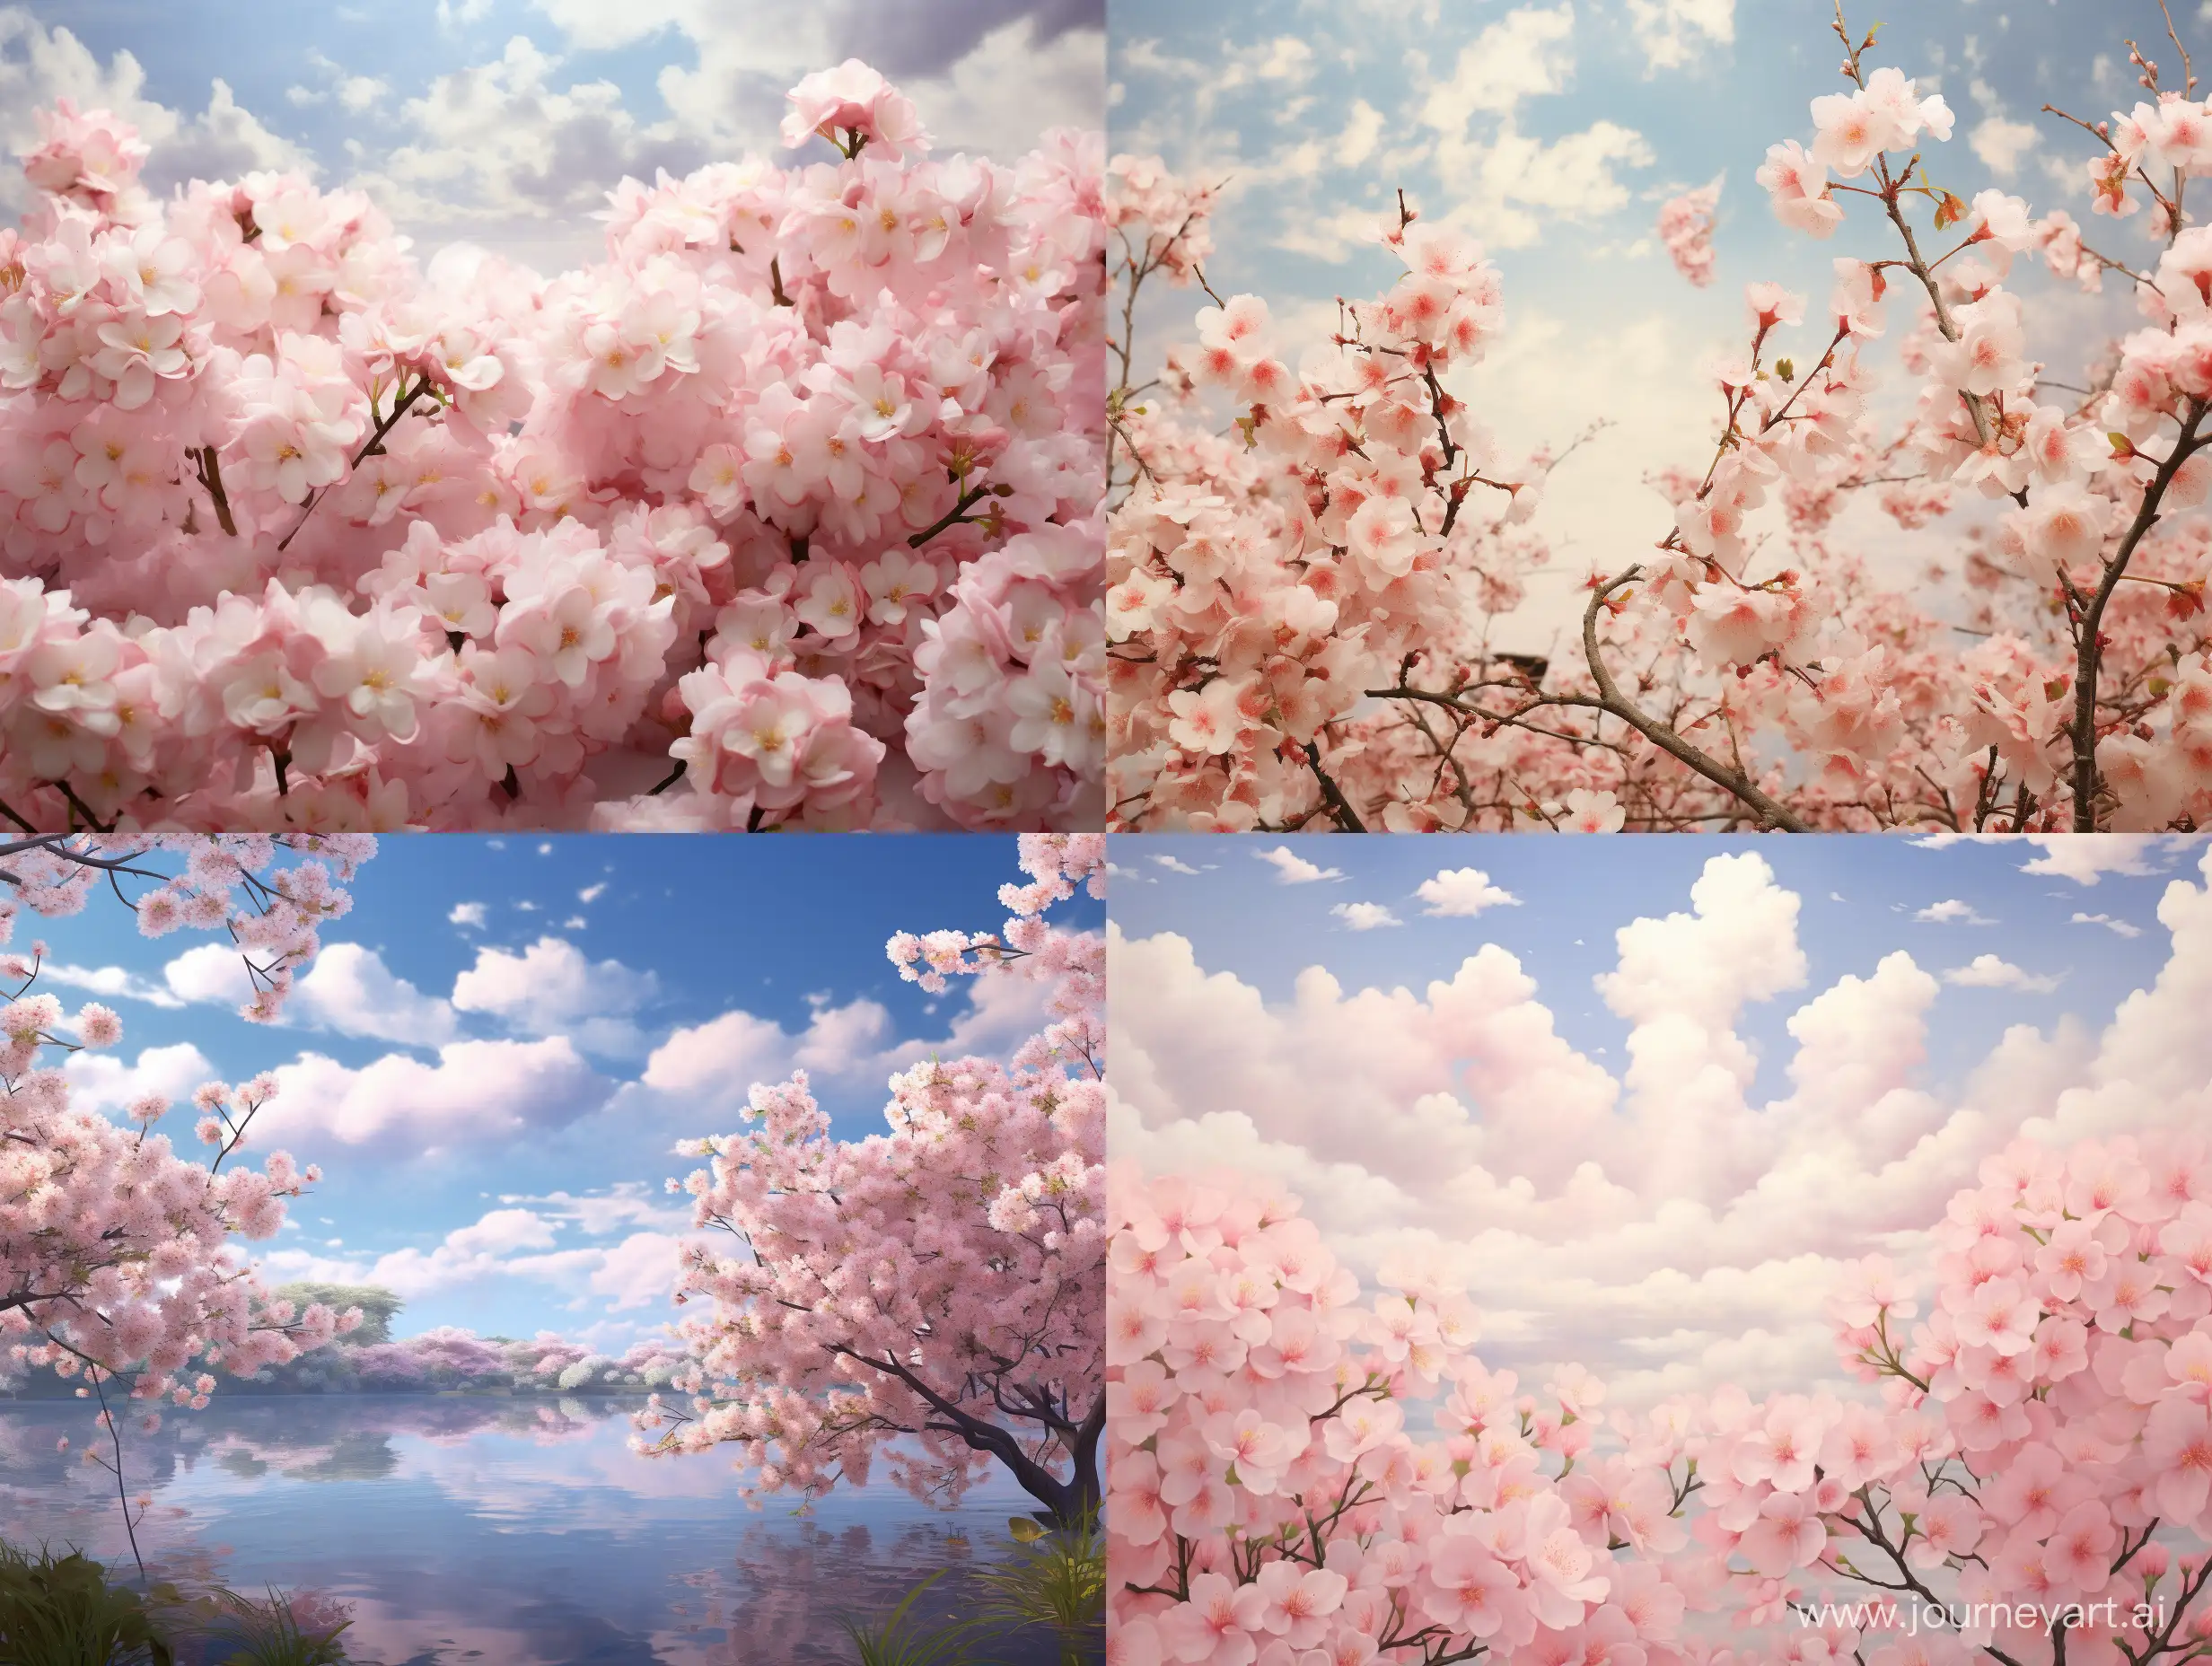  Photorealistic Digital Photography of a sprawling sky dominating the center, a tranquil expanse with a few wisps of white clouds. Tucked in the corner, cherry blossom branches subtly intrude, their delicate pink flowers occupying a modest space, enhancing the sky's vastness with their gentle presence.
